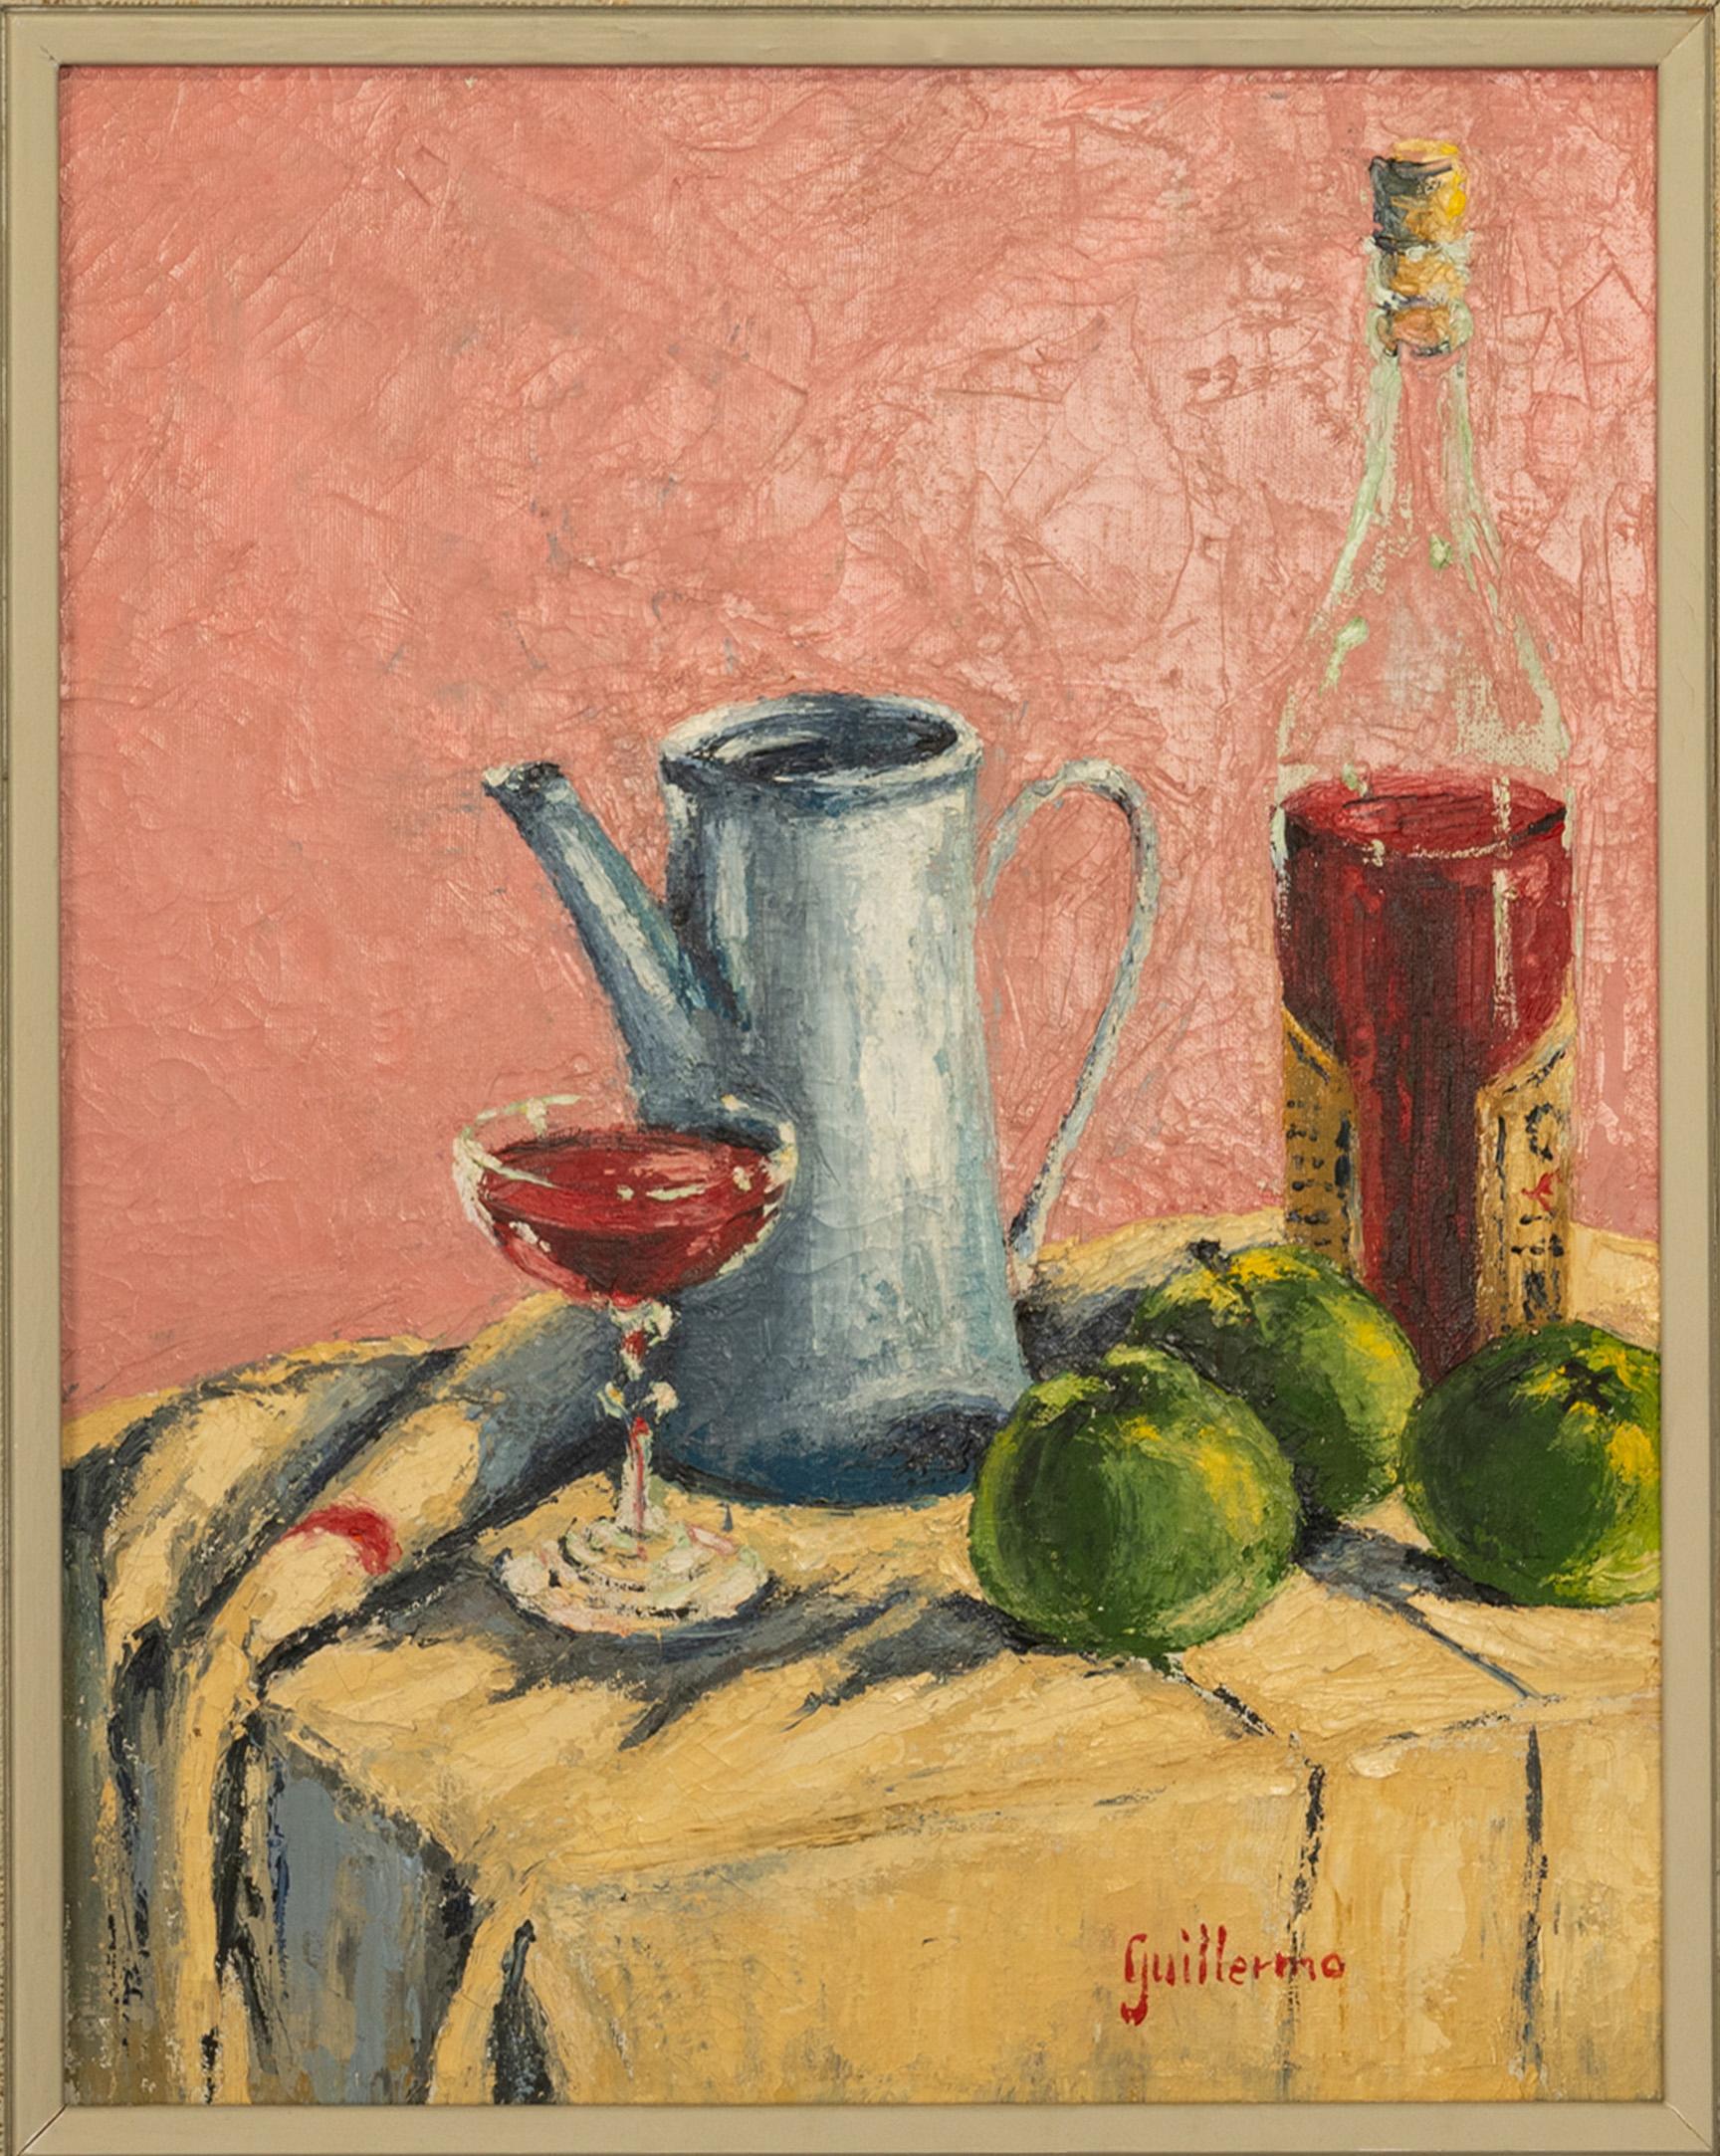 A good Spanish Modernist Abstract Impressionist painting by Juan Guillermo Rodriguez Baez (1916-1968), still life oil on canvas, circa 1950.
The painting depicts a table with a brightly colored cloth, with a bottle of wine and filled wine glass,